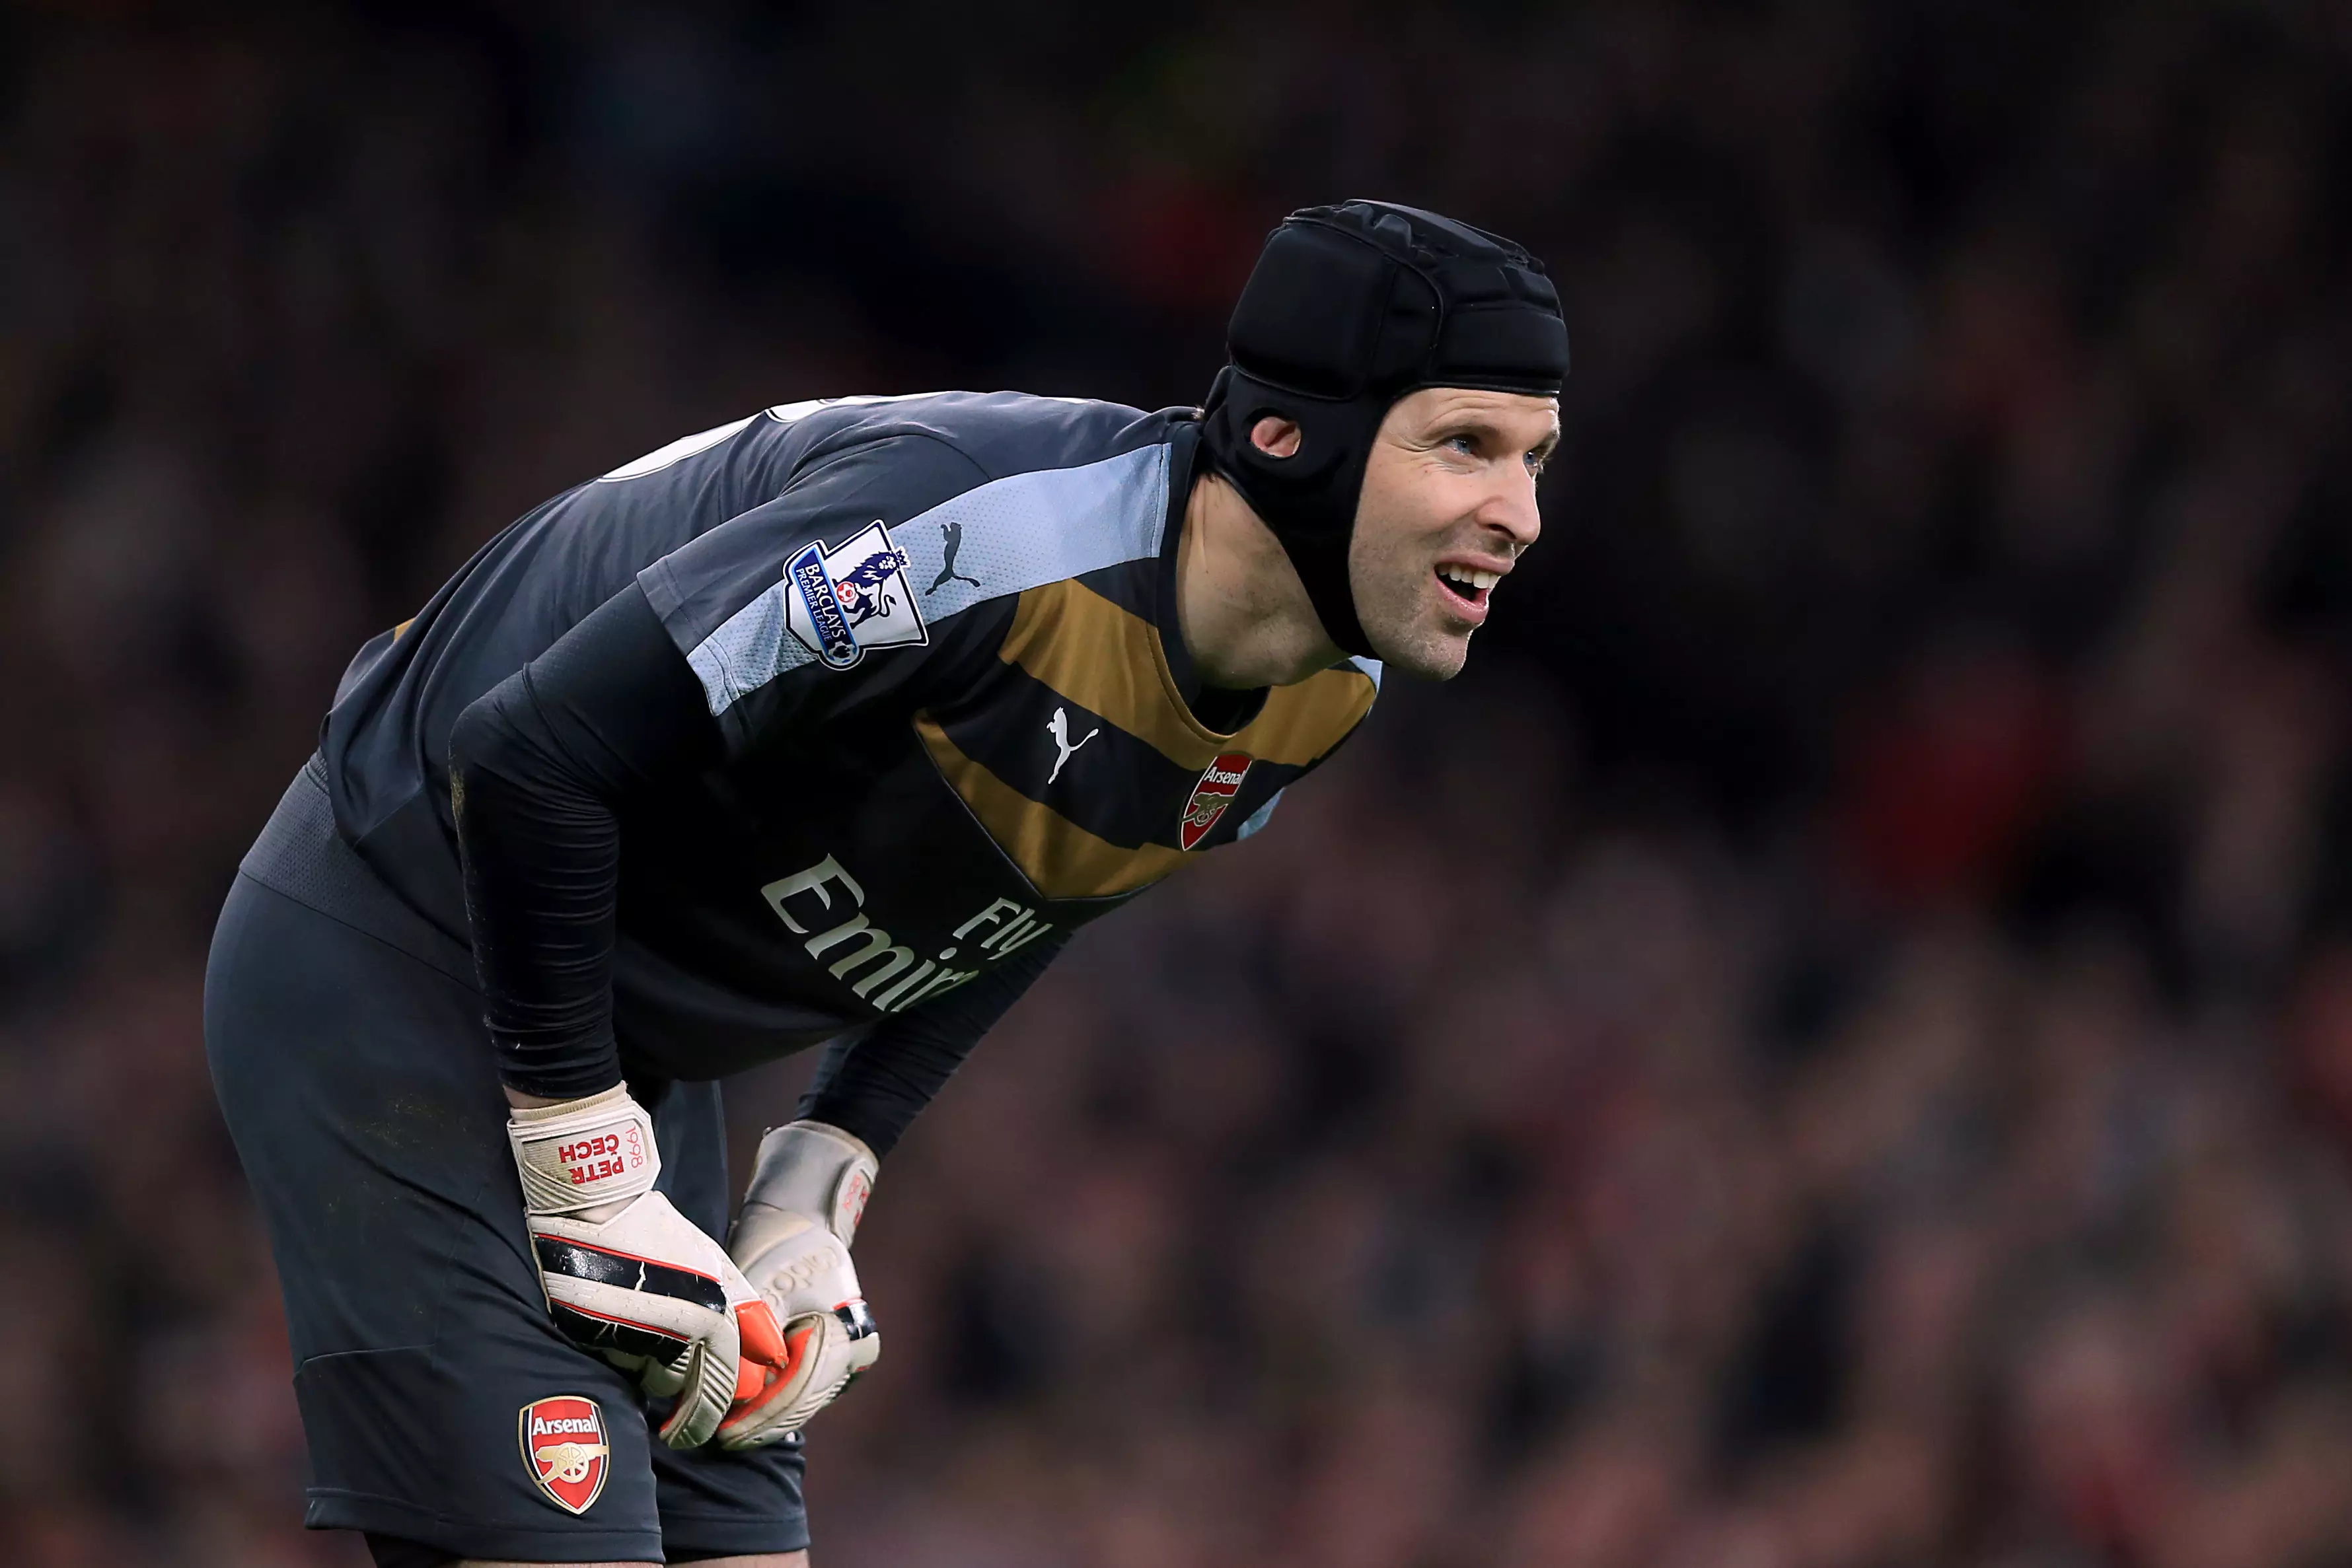 Cech has struggled to replicate the form that made him one of the world's greatest goalkeepers since swapping Chelsea for Arsenal. Images: PA